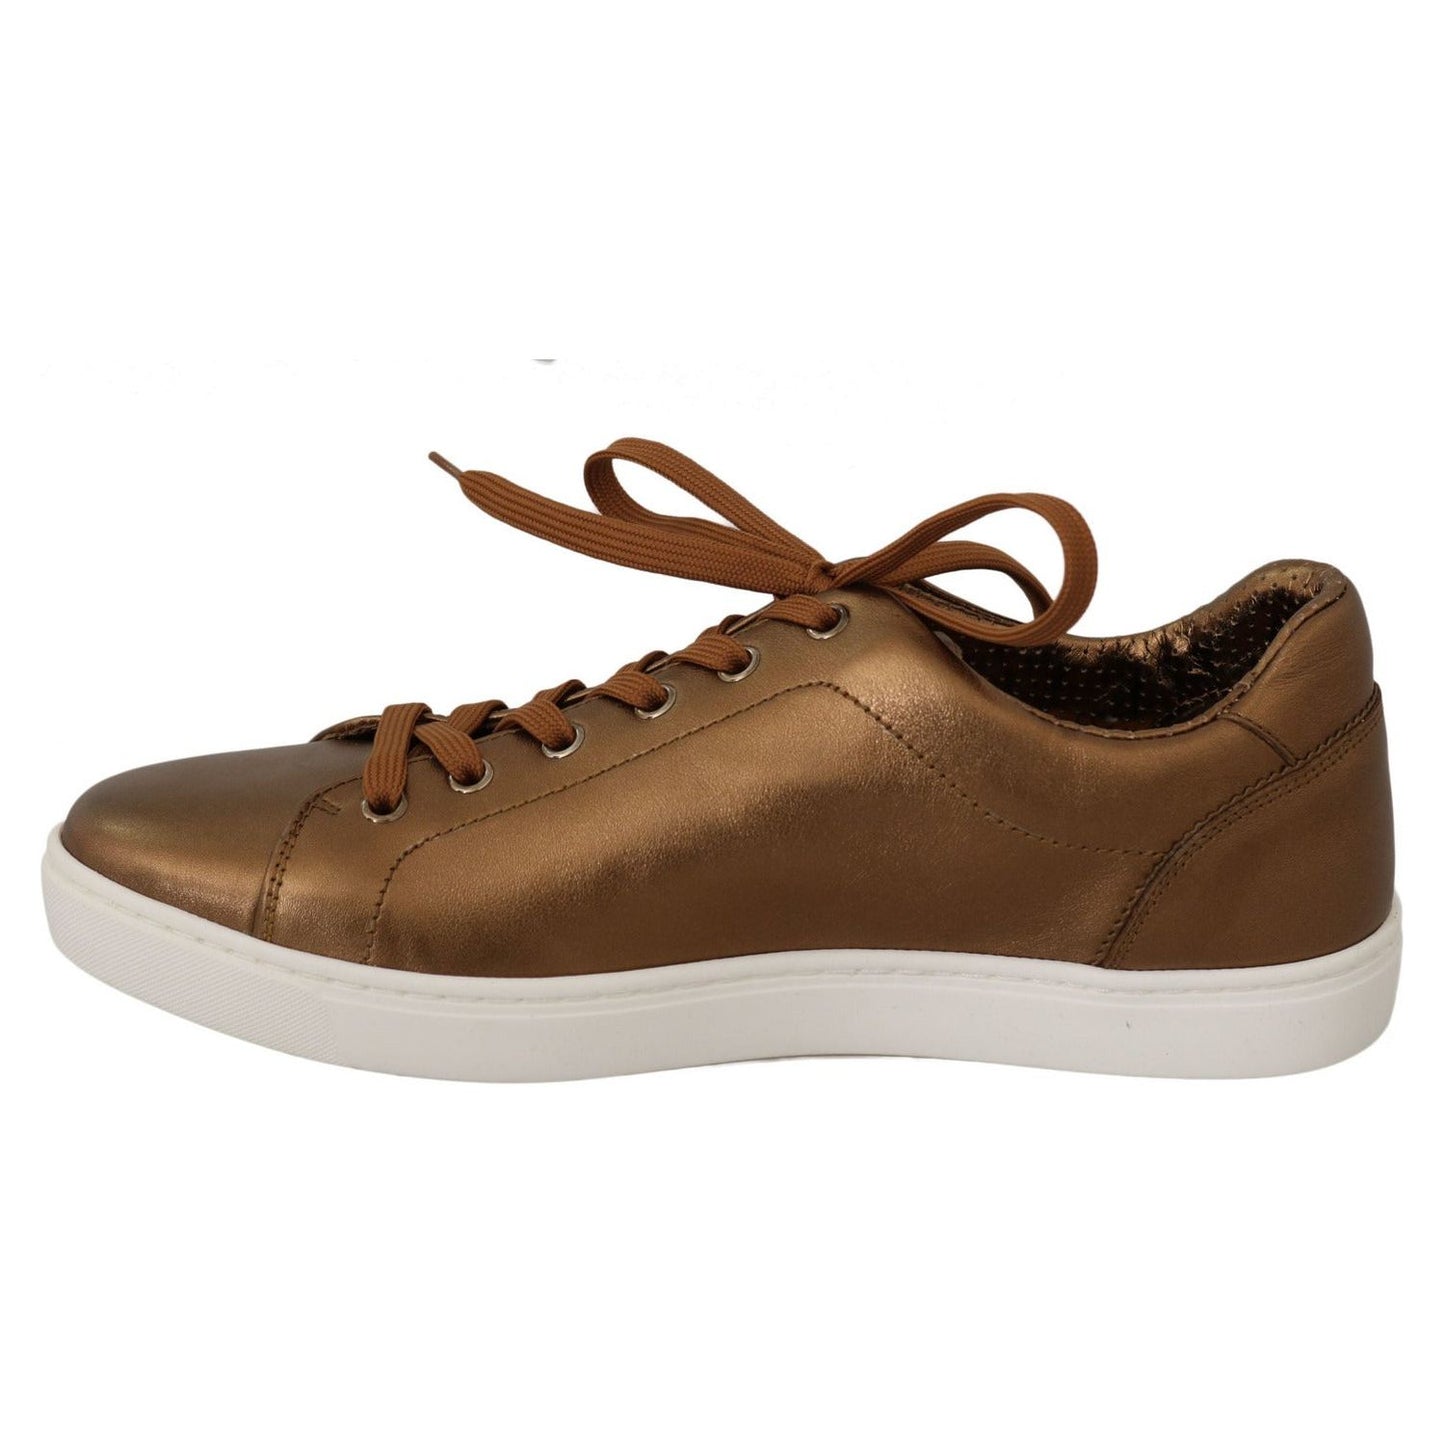 Dolce & Gabbana Golden Metallic Leather Sneakers gold-leather-mens-casual-sneakers IMG_8823-scaled.jpg